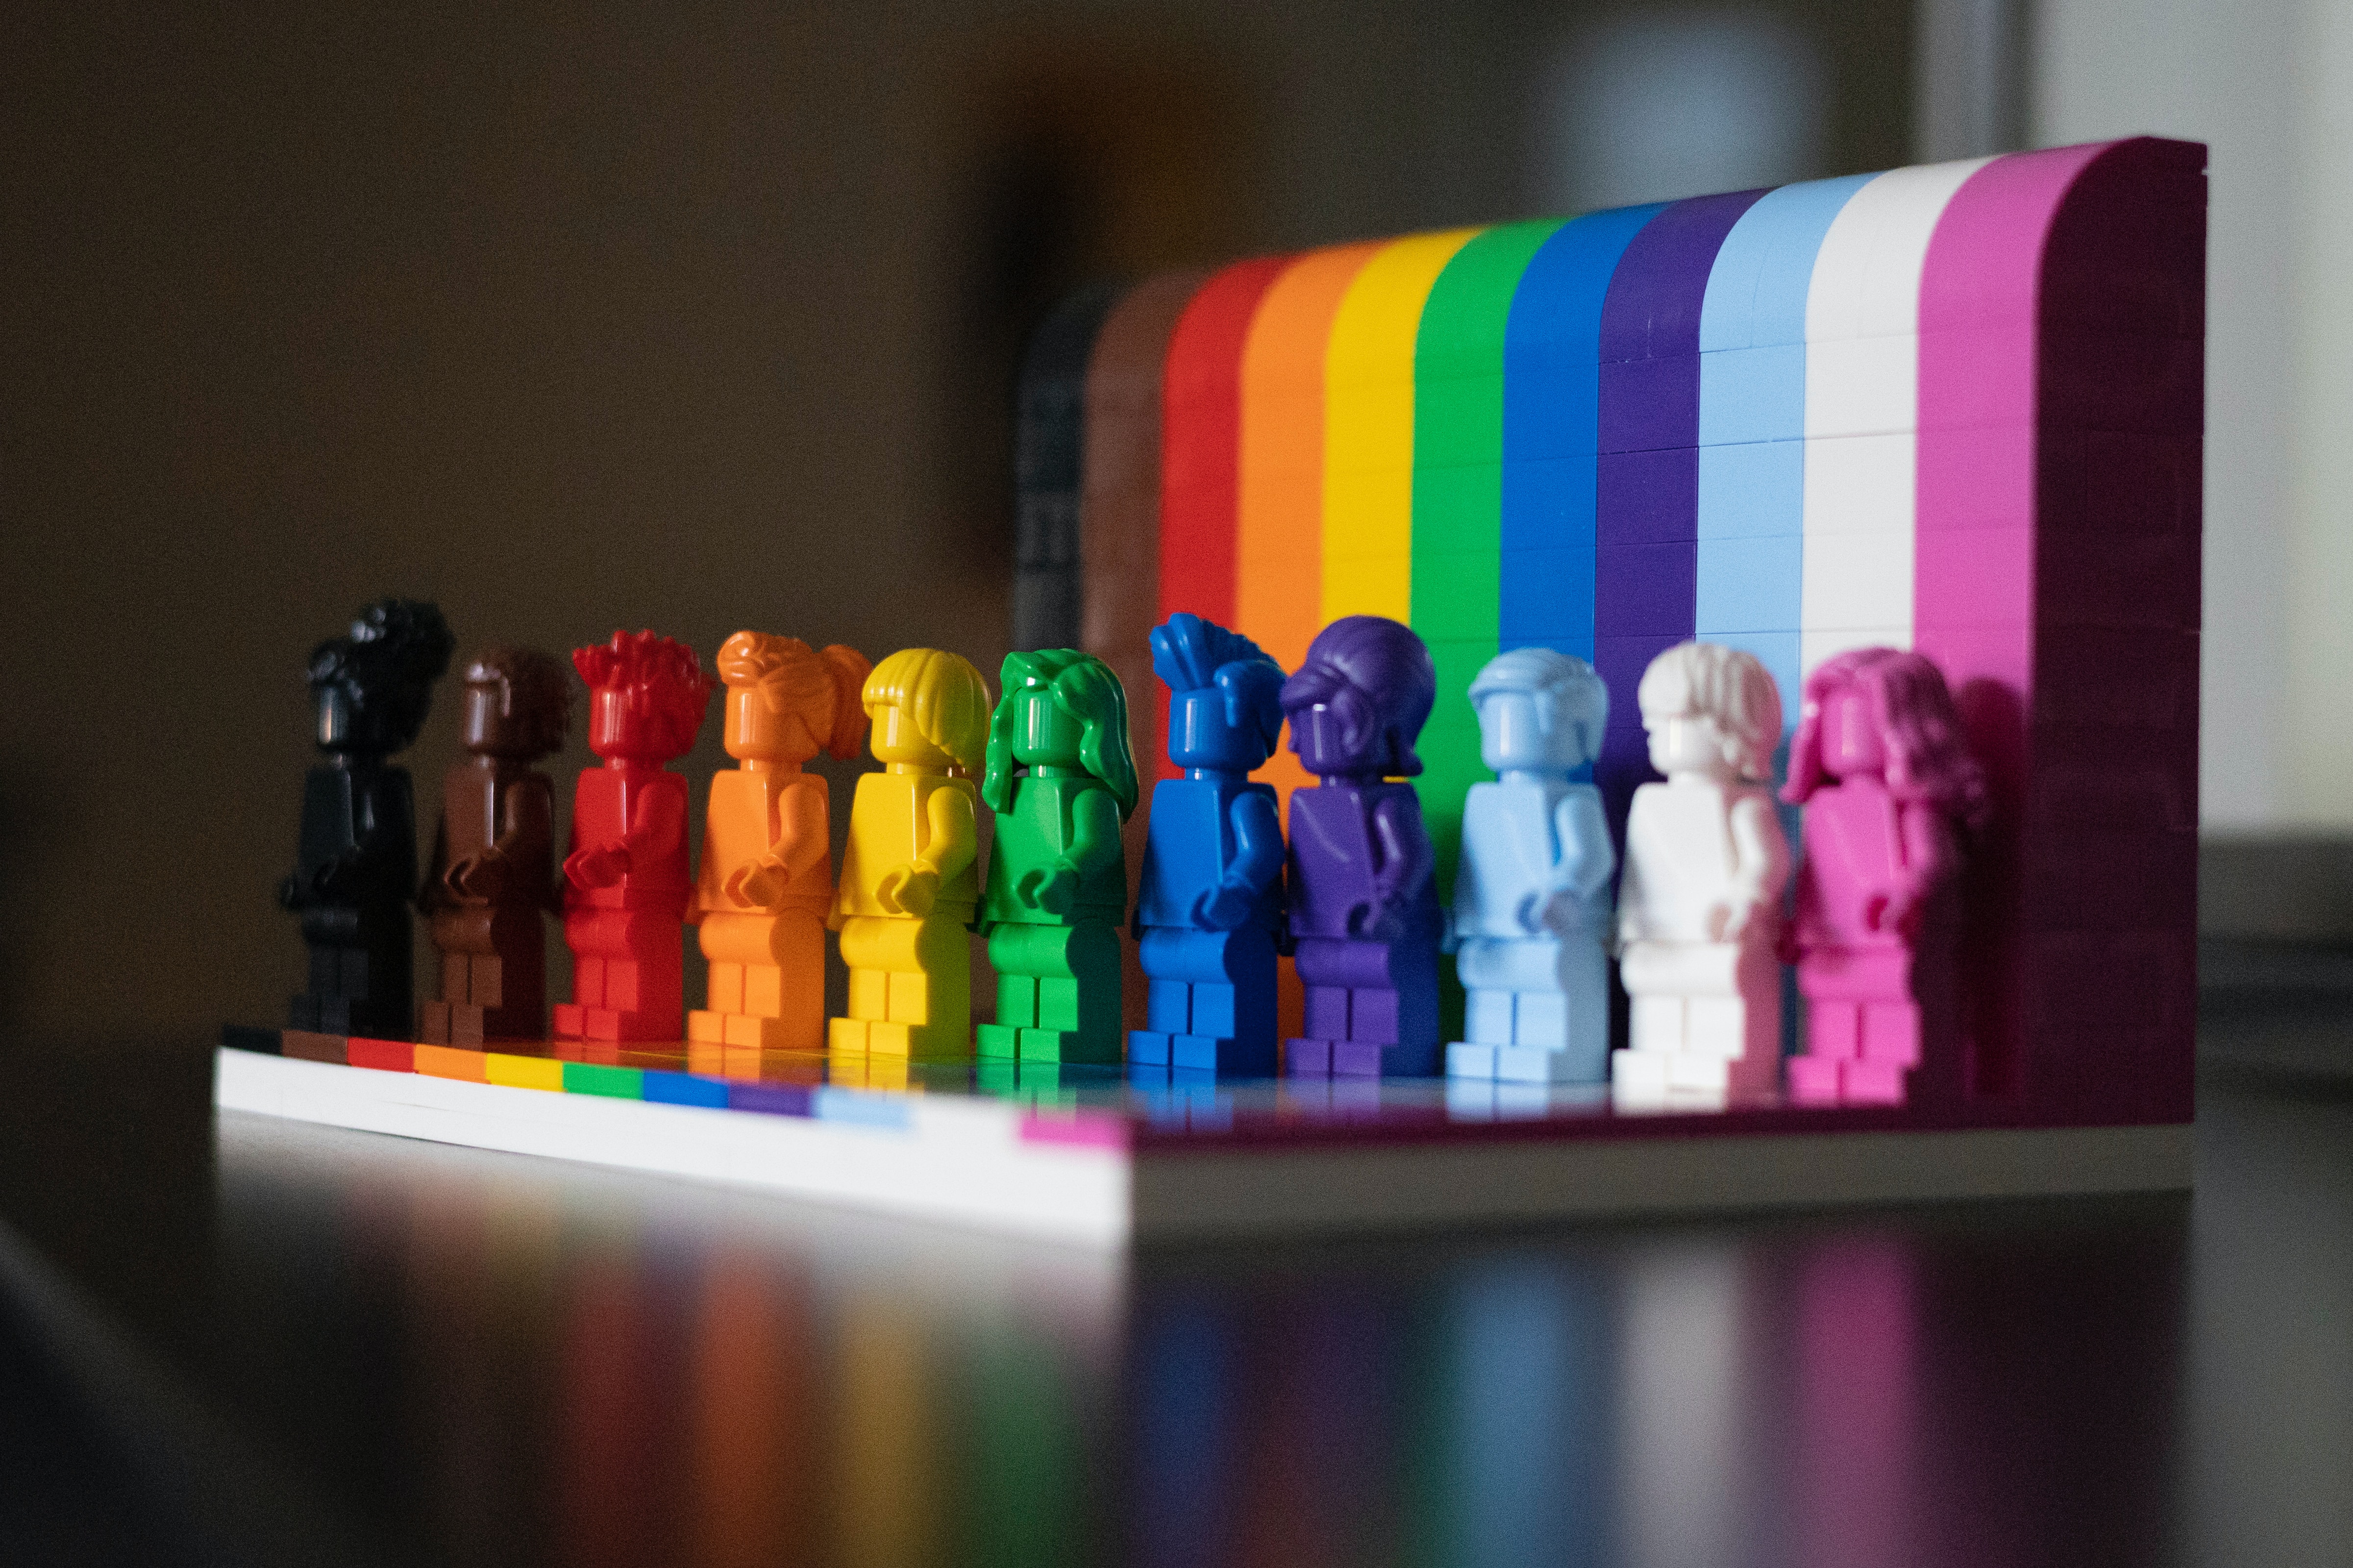 Lego minifigs lined up in the colours of the Pride flag